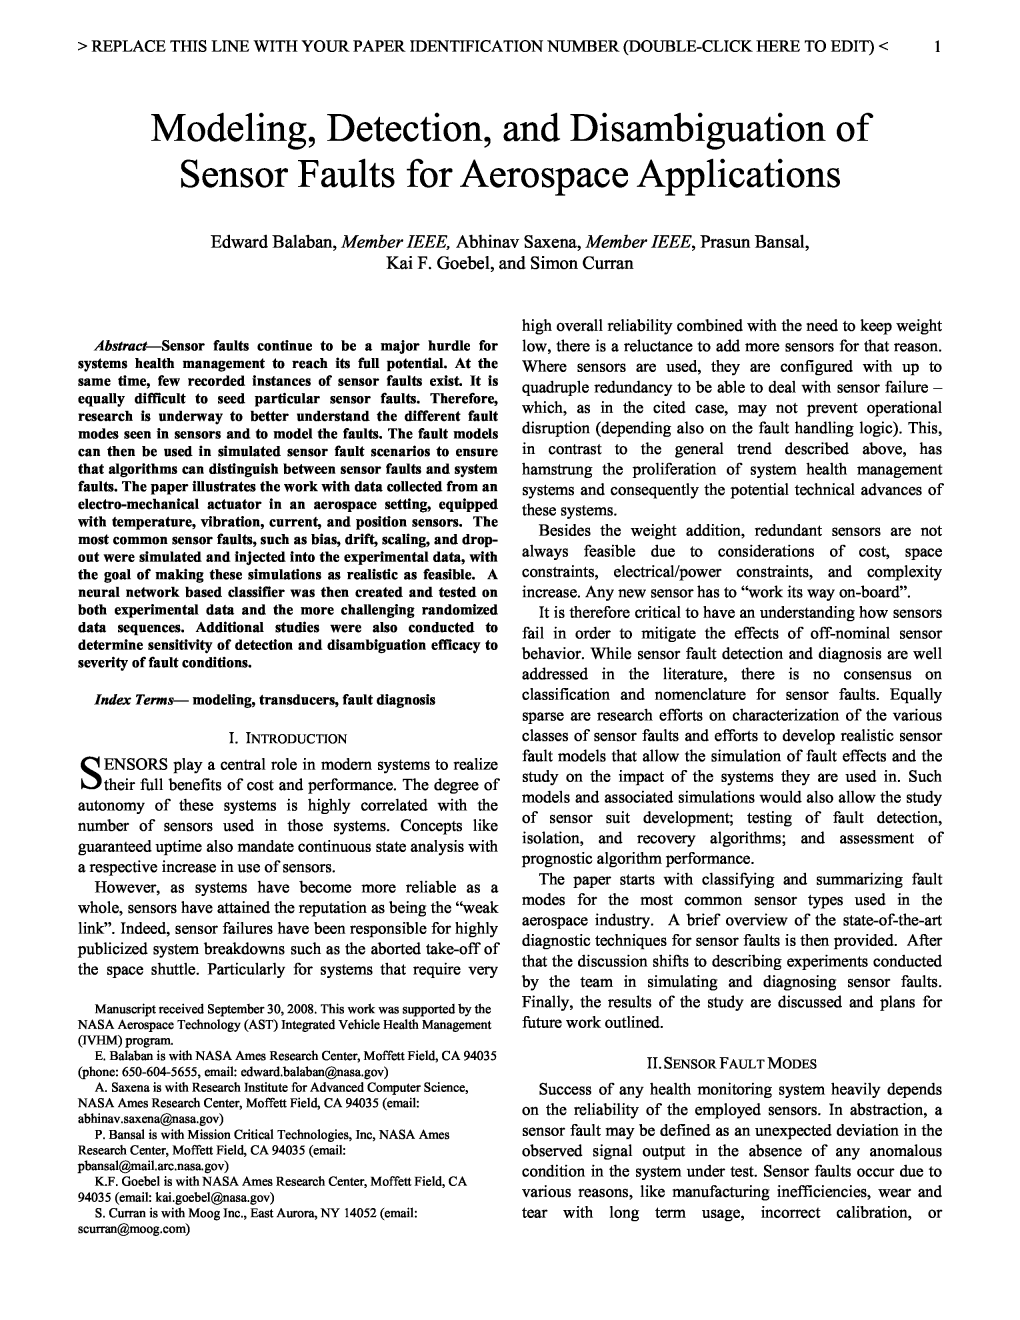 Modeling, Detection, and Disambiguation of Sensor Faults for Aerospace Applications